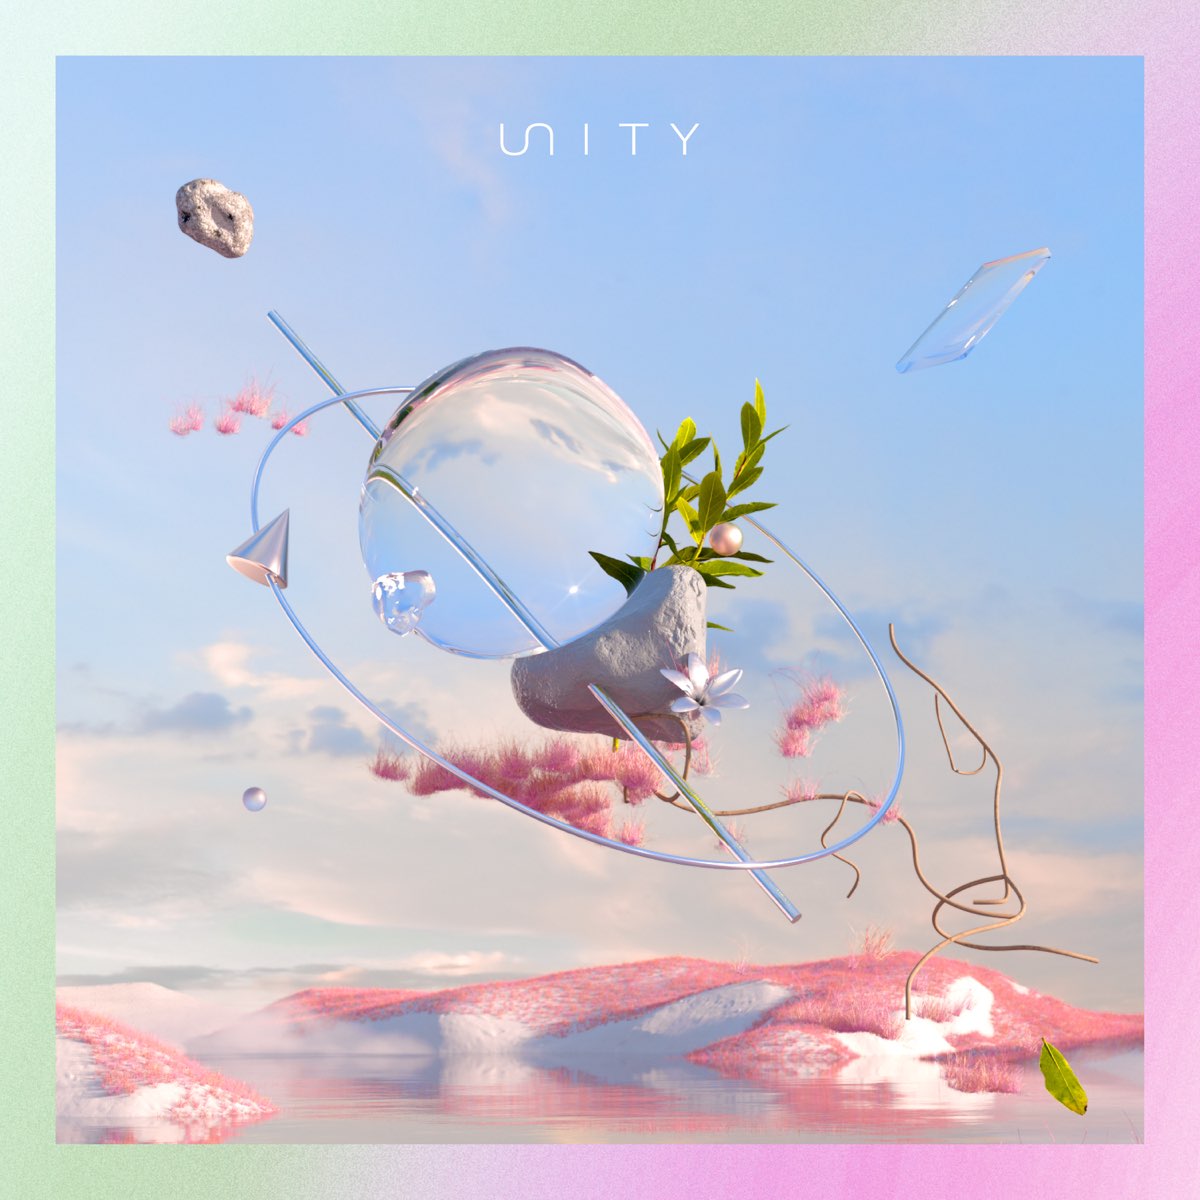 Unity - EP by Mrs. Green Apple on Apple Music